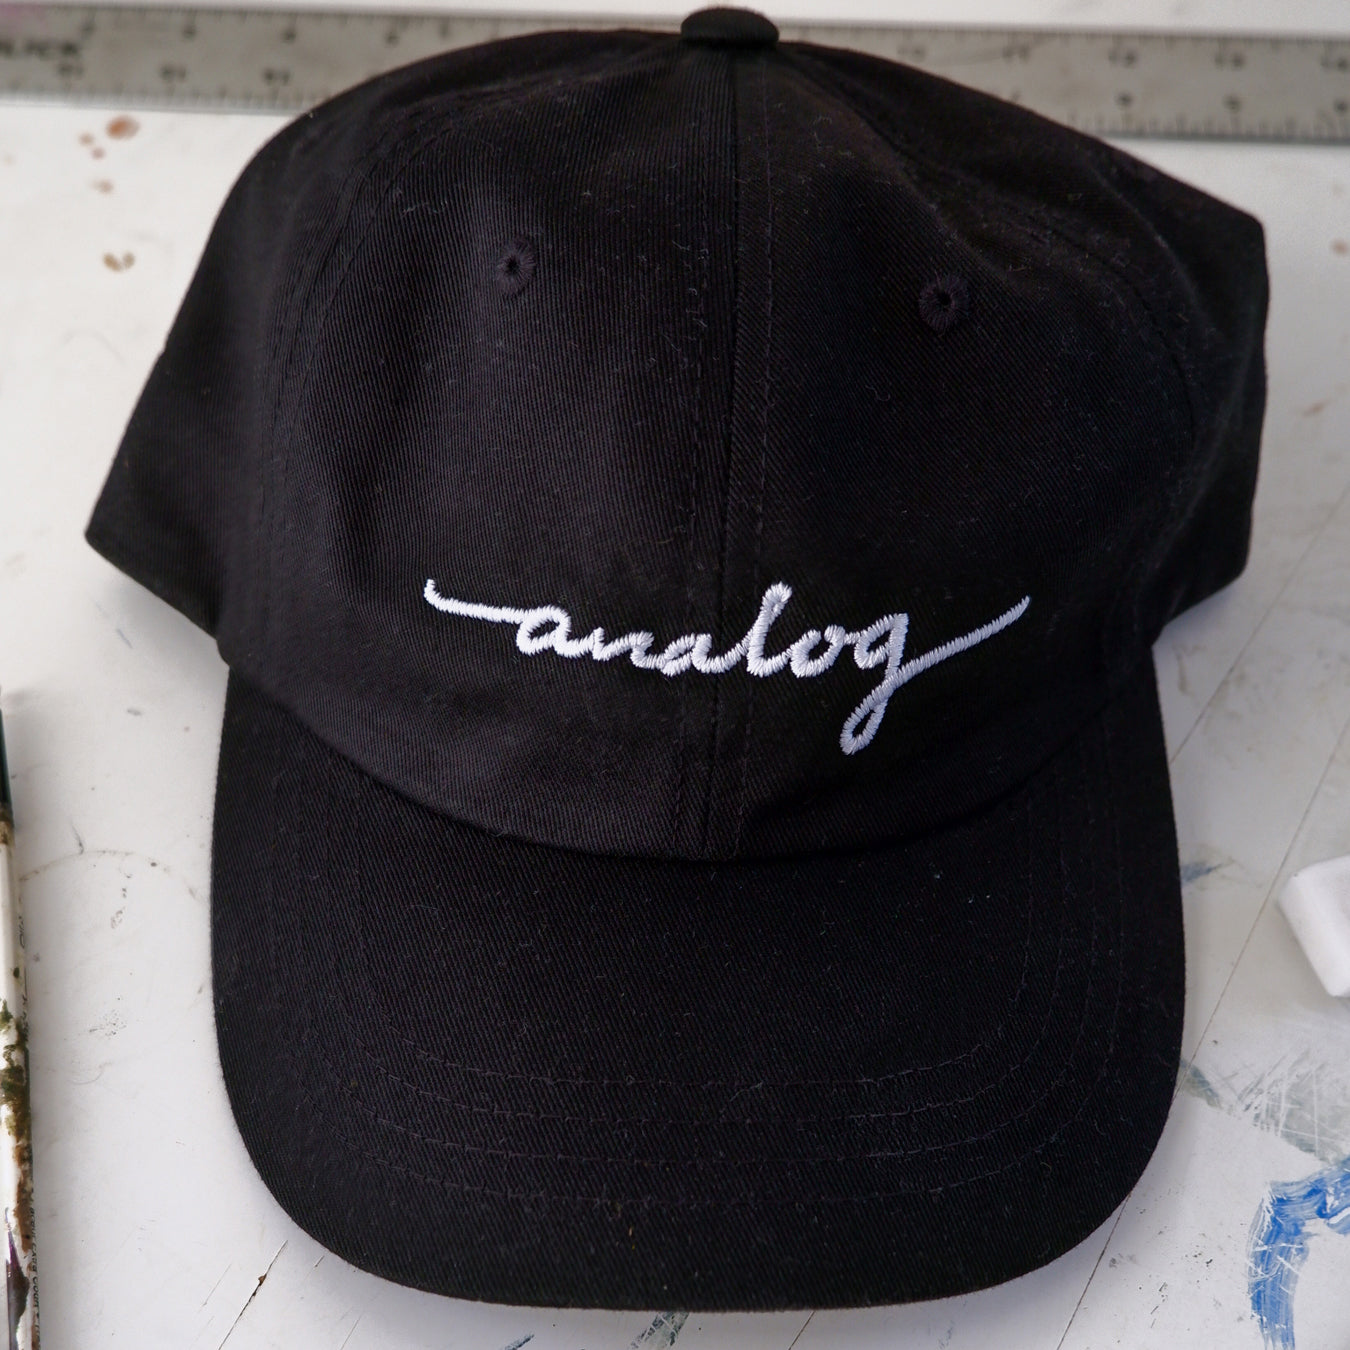 A black Analog hat with the word 'anda' inscribed on it.